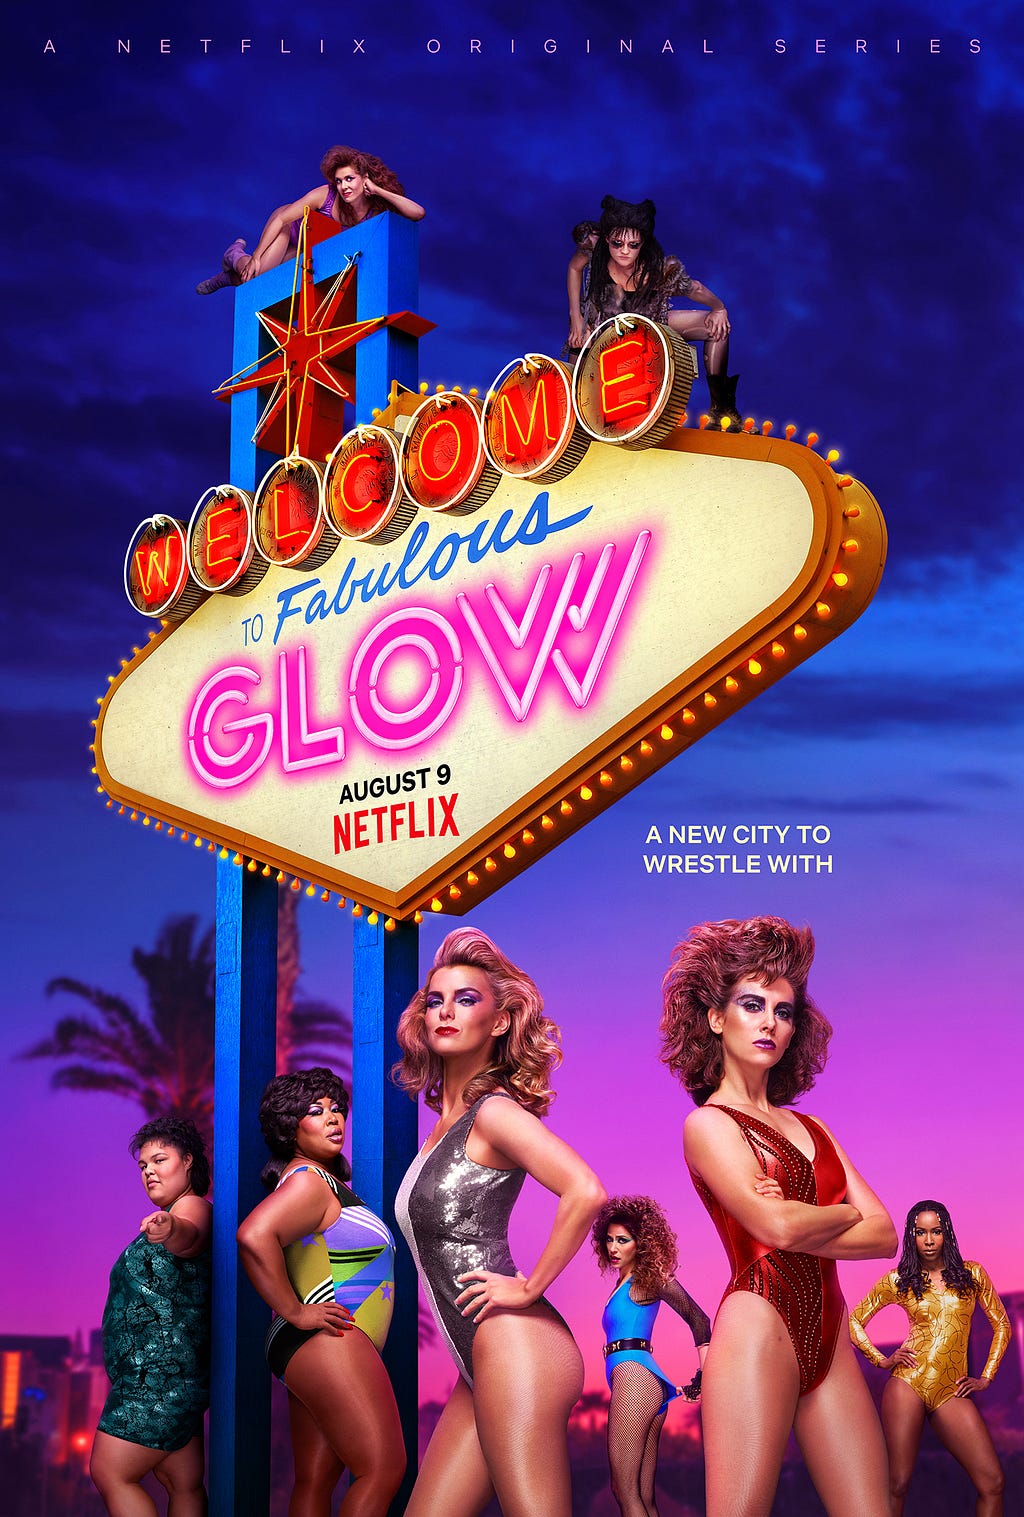 The cast of GLOW dressed in their 80s wrestling outfits around a large illuminated scene like the sort you might find in a classic American motel. Several are stood in front of the sign, others are actually stood on the sign itself